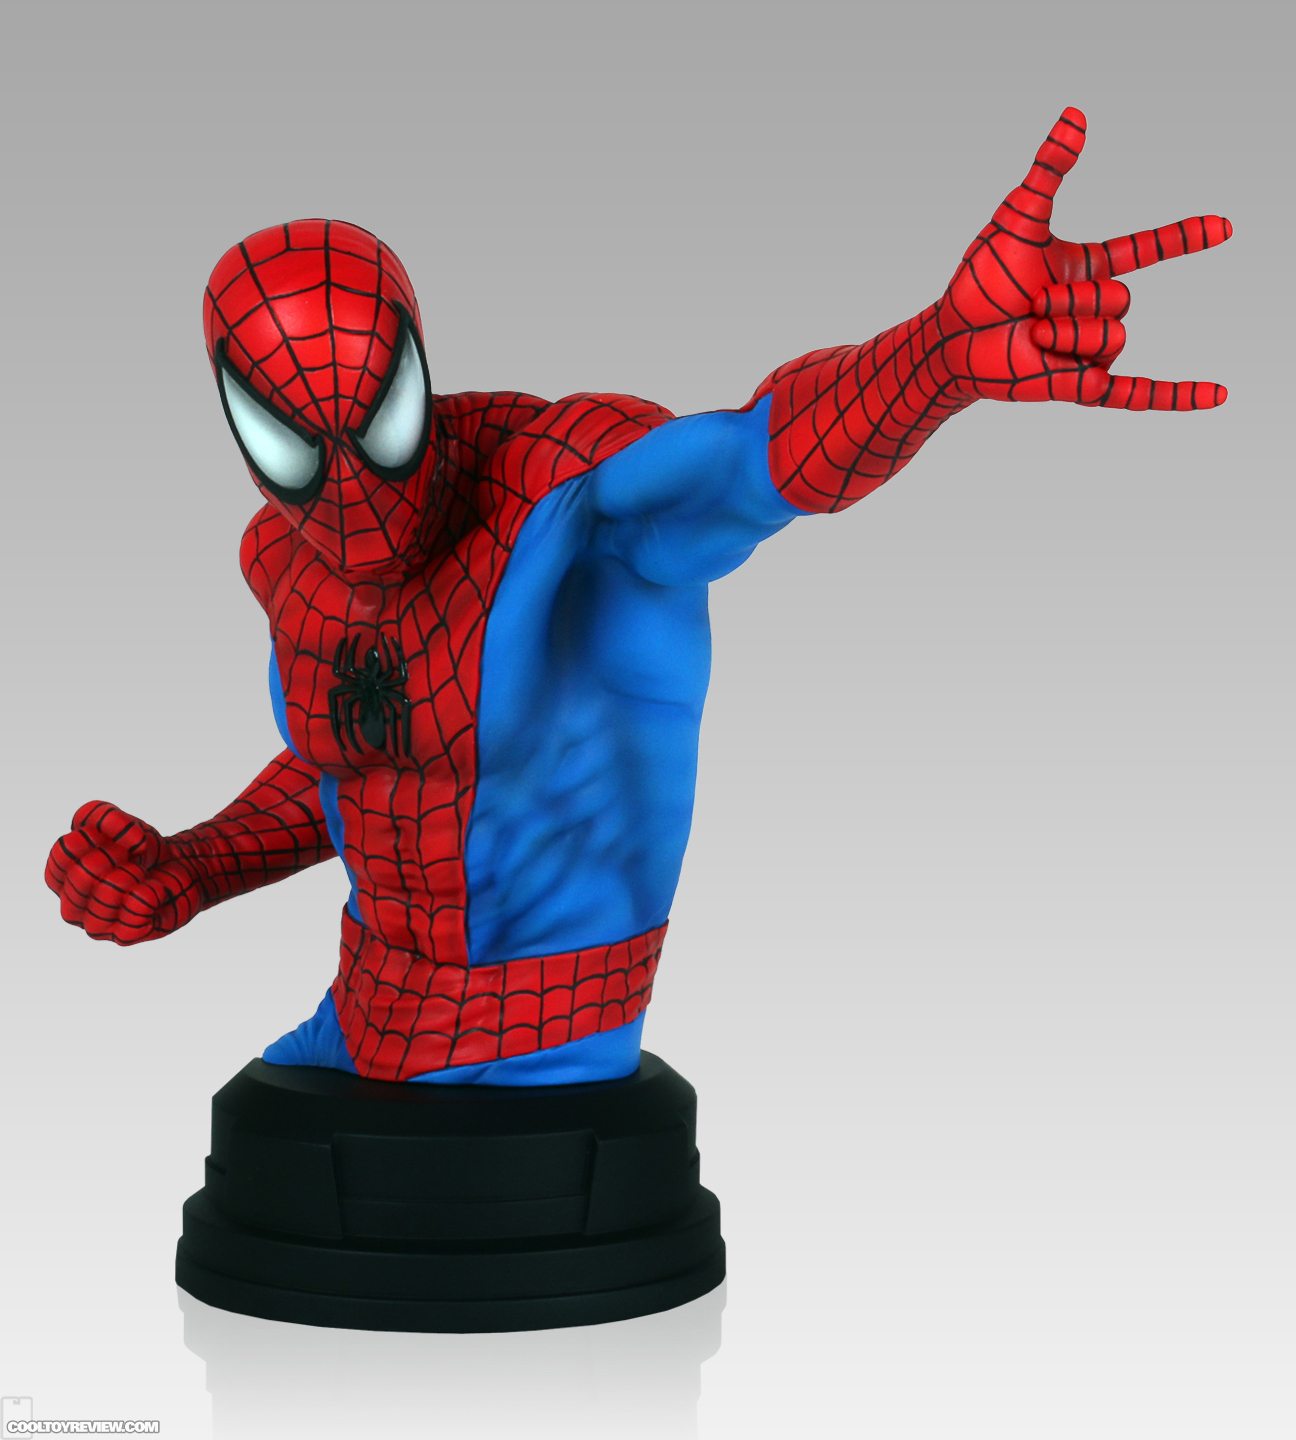 [Gentle Giant] Spider-Man Red & Blue Mini Bust Gentle_Giant_Ltd_Spider-Man_Mini_Bust-01